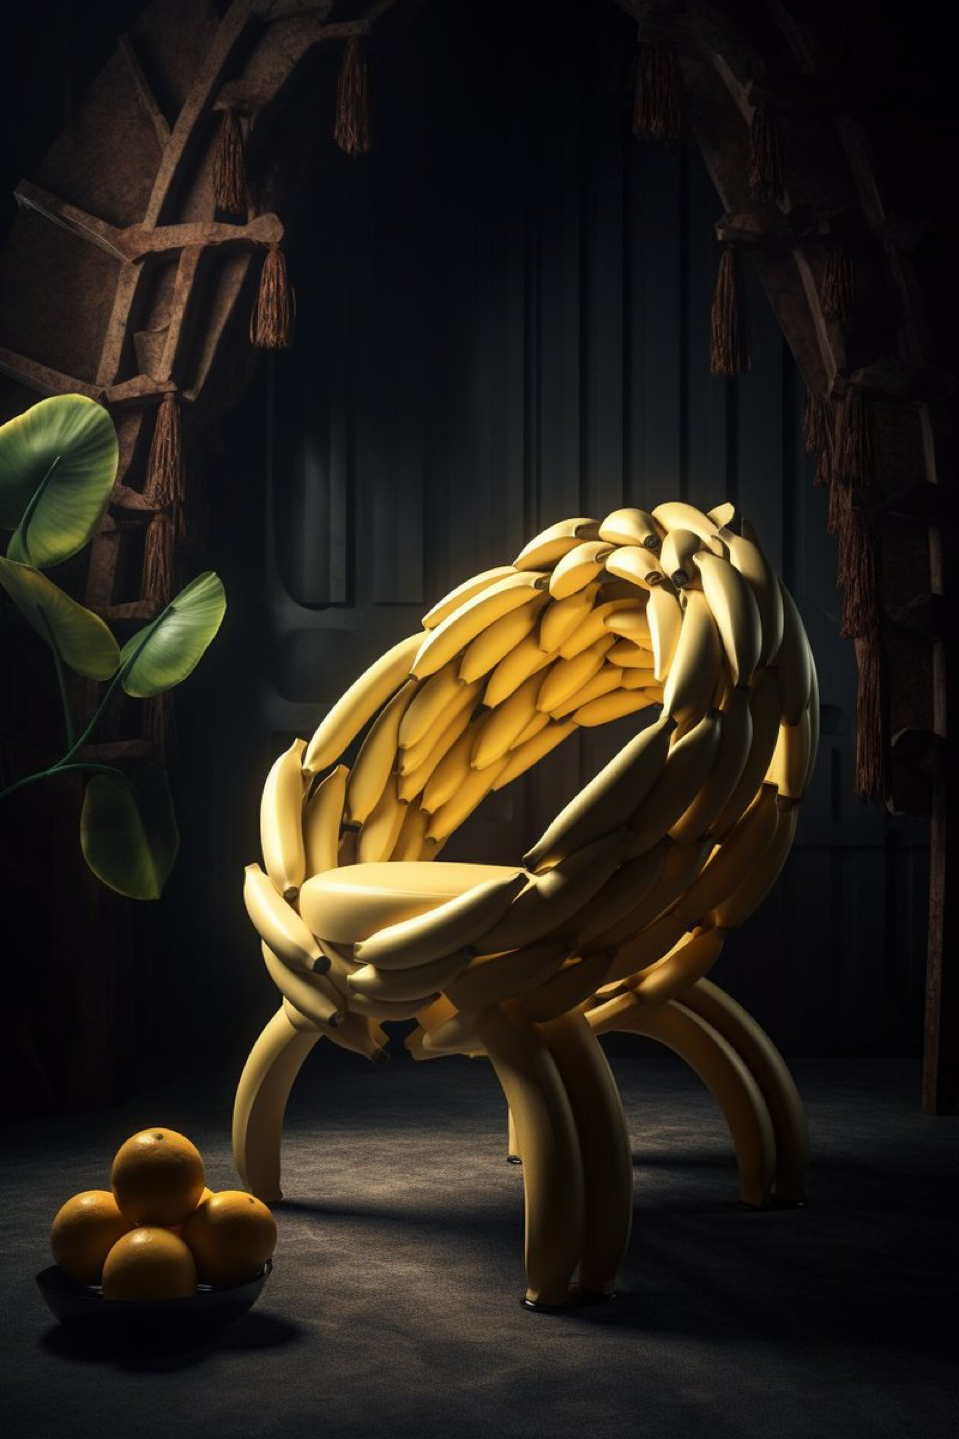 Subject: A futuristic organic chair made of bananas, Style:Japandi, Photography: furniture photography, Lighting: realistic shadows, realistic lighting, realistic reflections, Colors:...